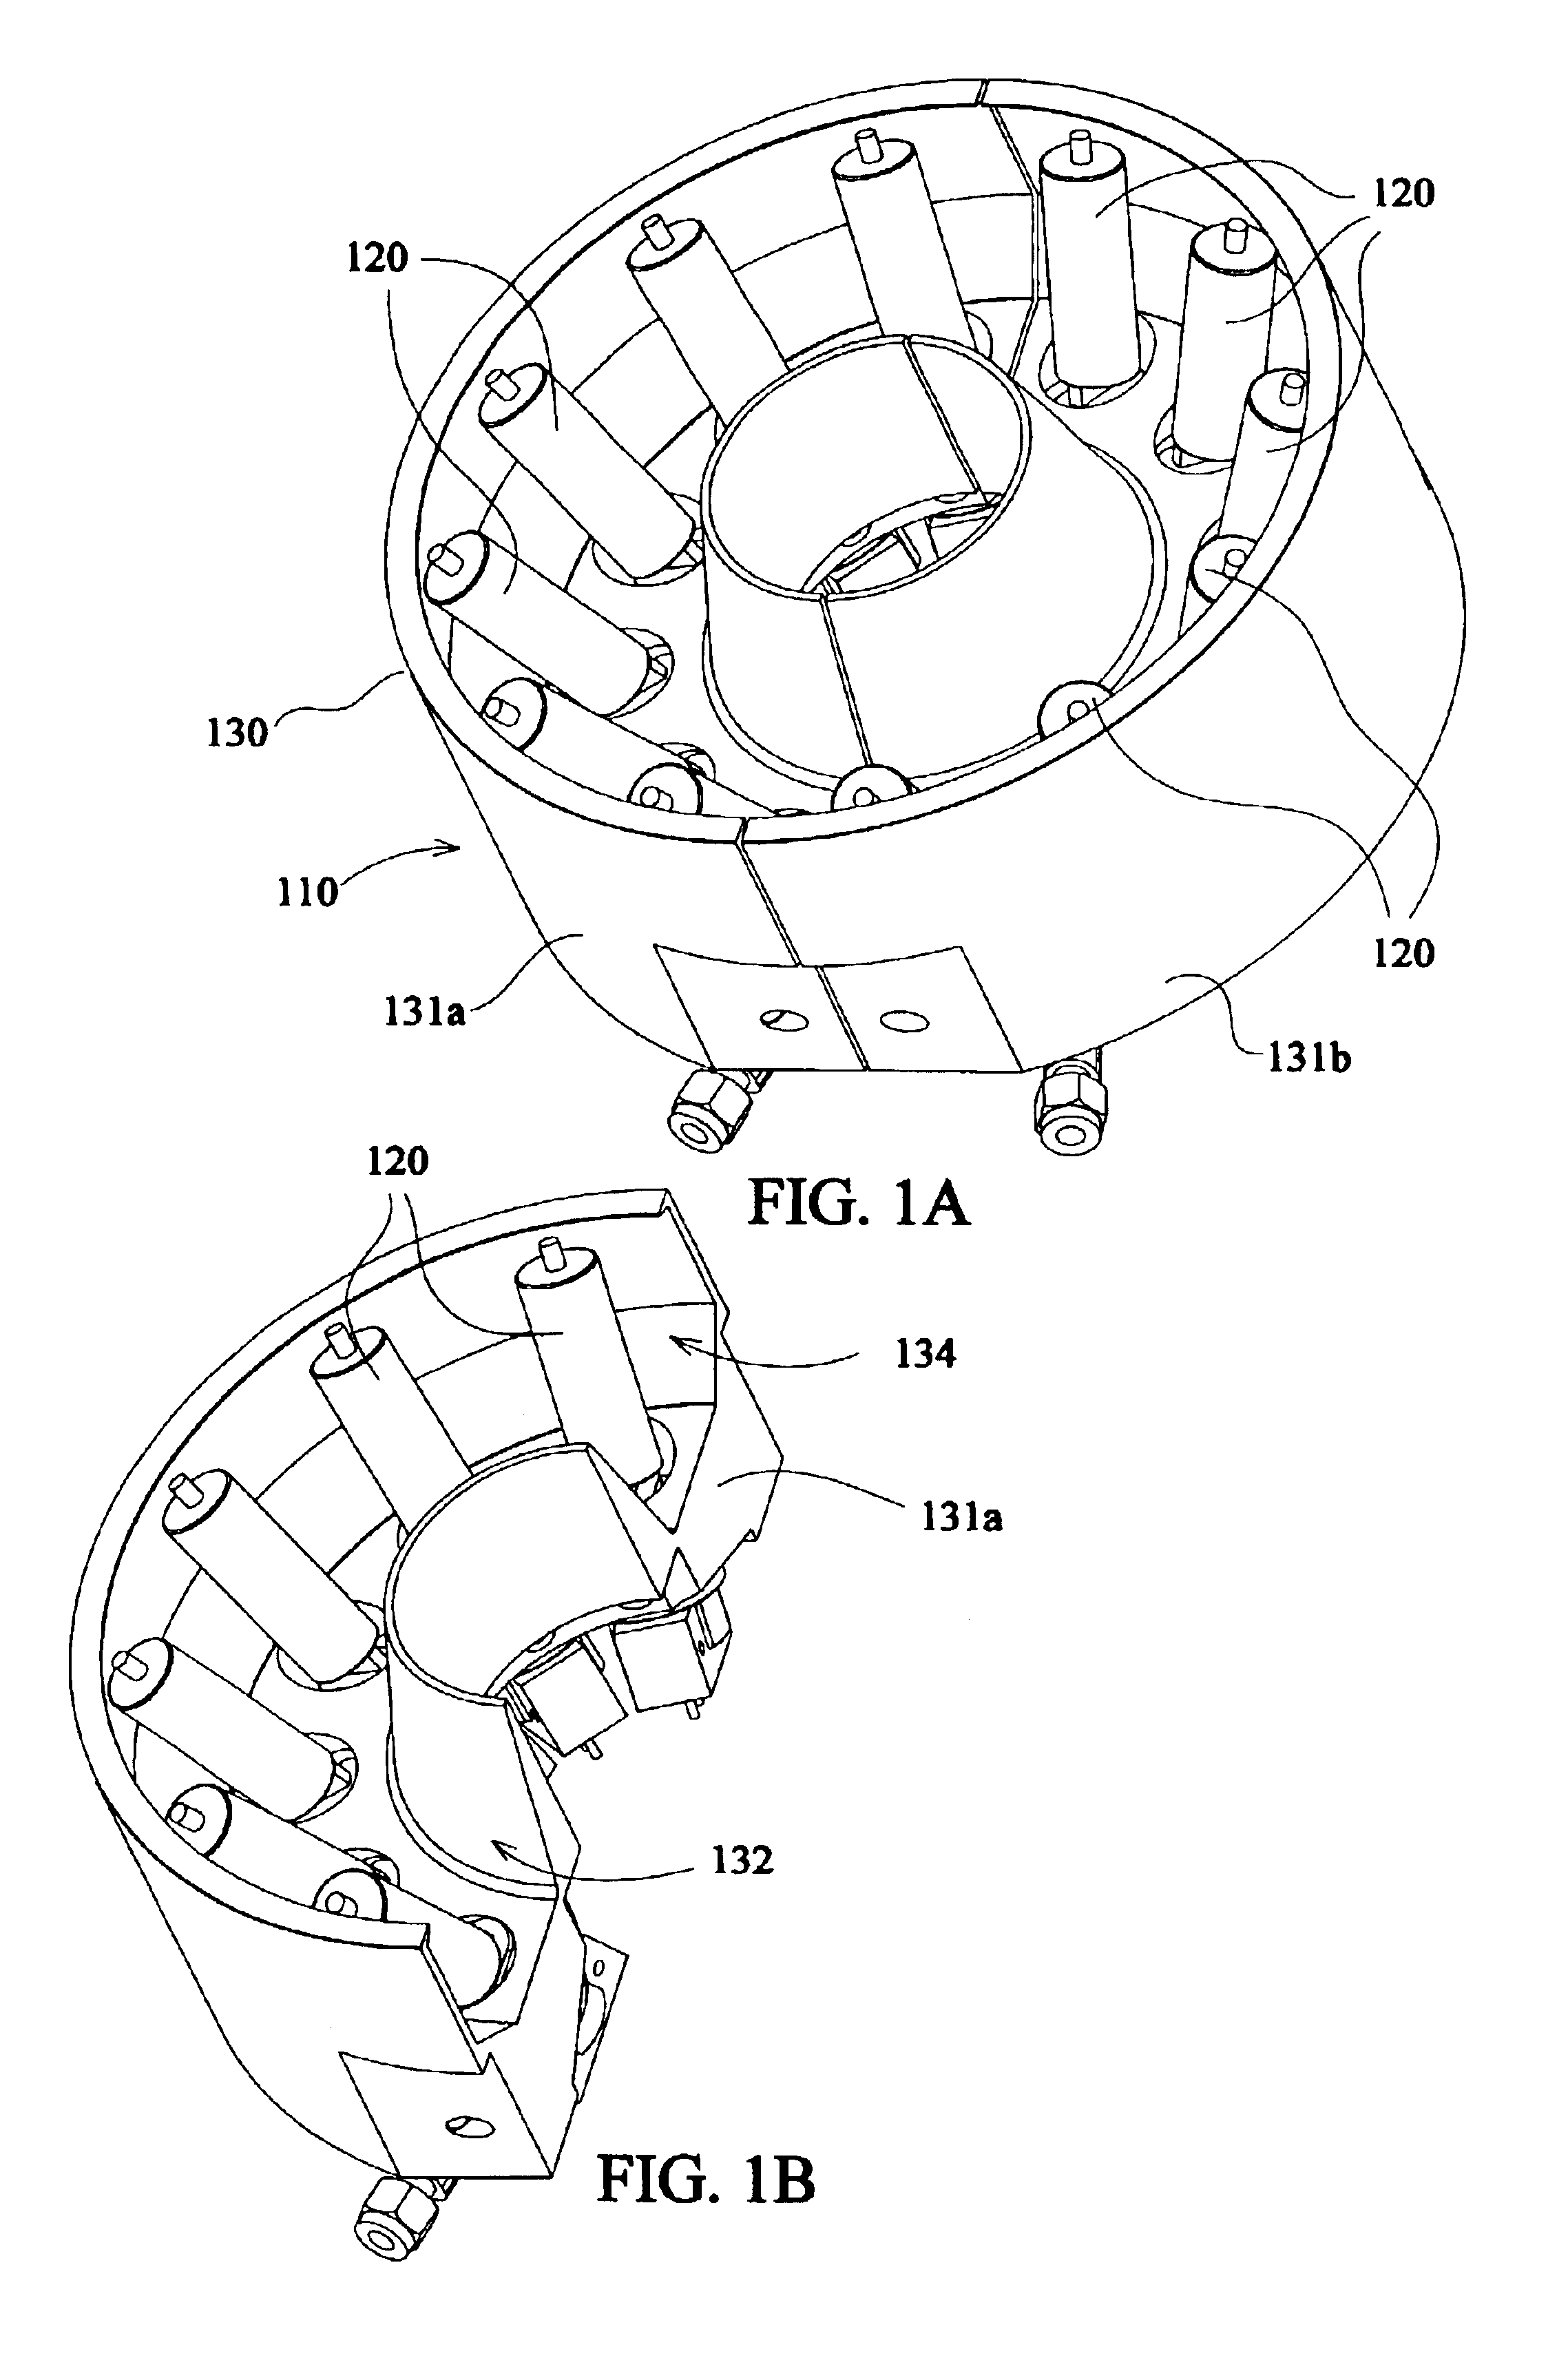 Radiant heating source with reflective cavity spanning at least two heating elements